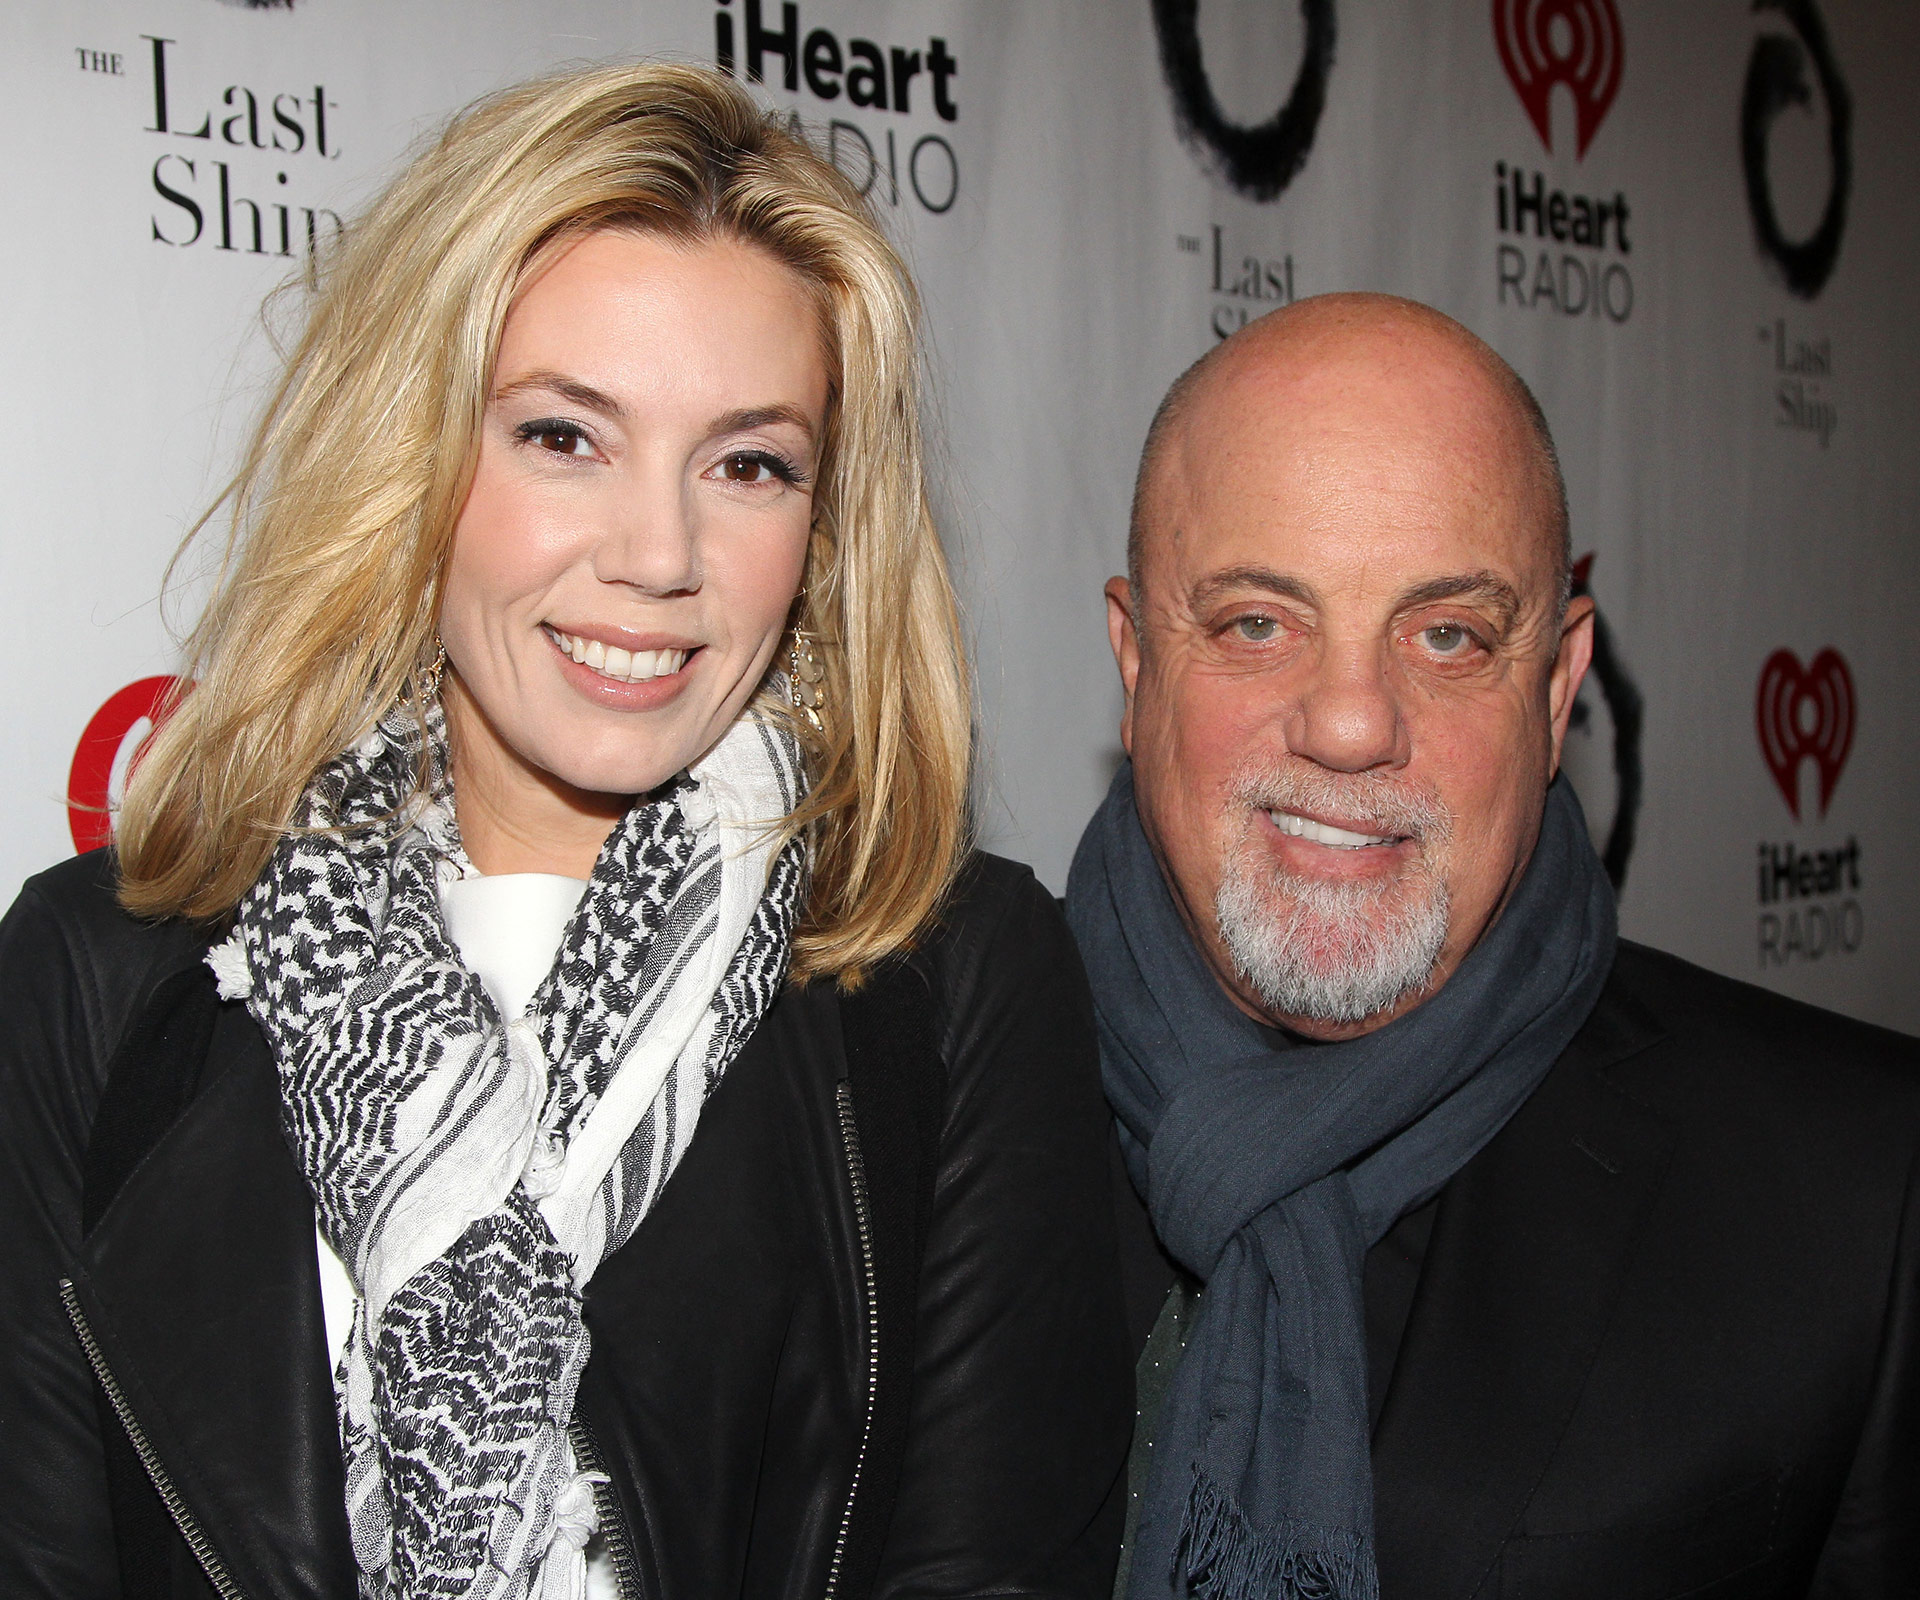 Billy Joel marries Alexis Roderick in a surprise Fourth of July party